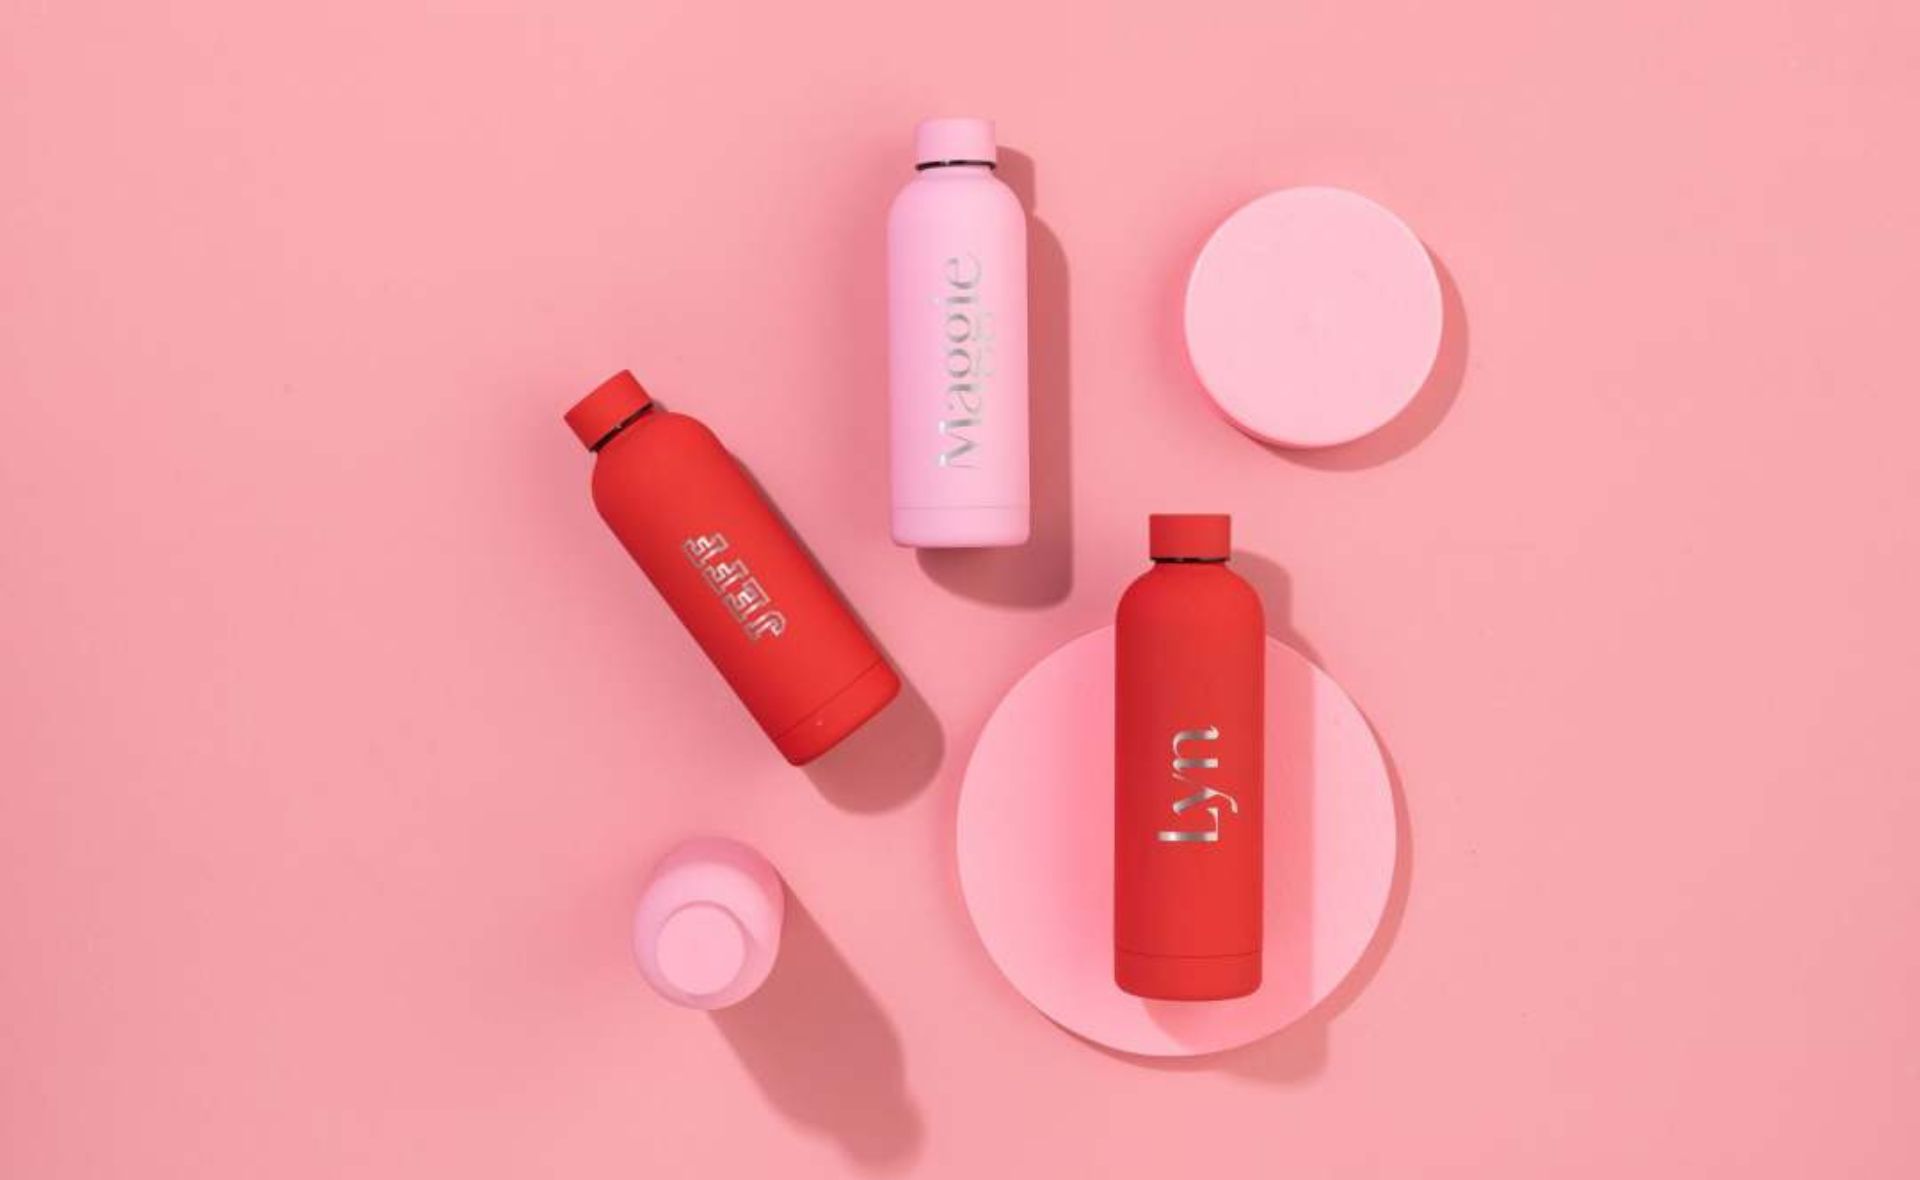 No more mix ups with these personalised drink bottles to keep you happy and hydrated